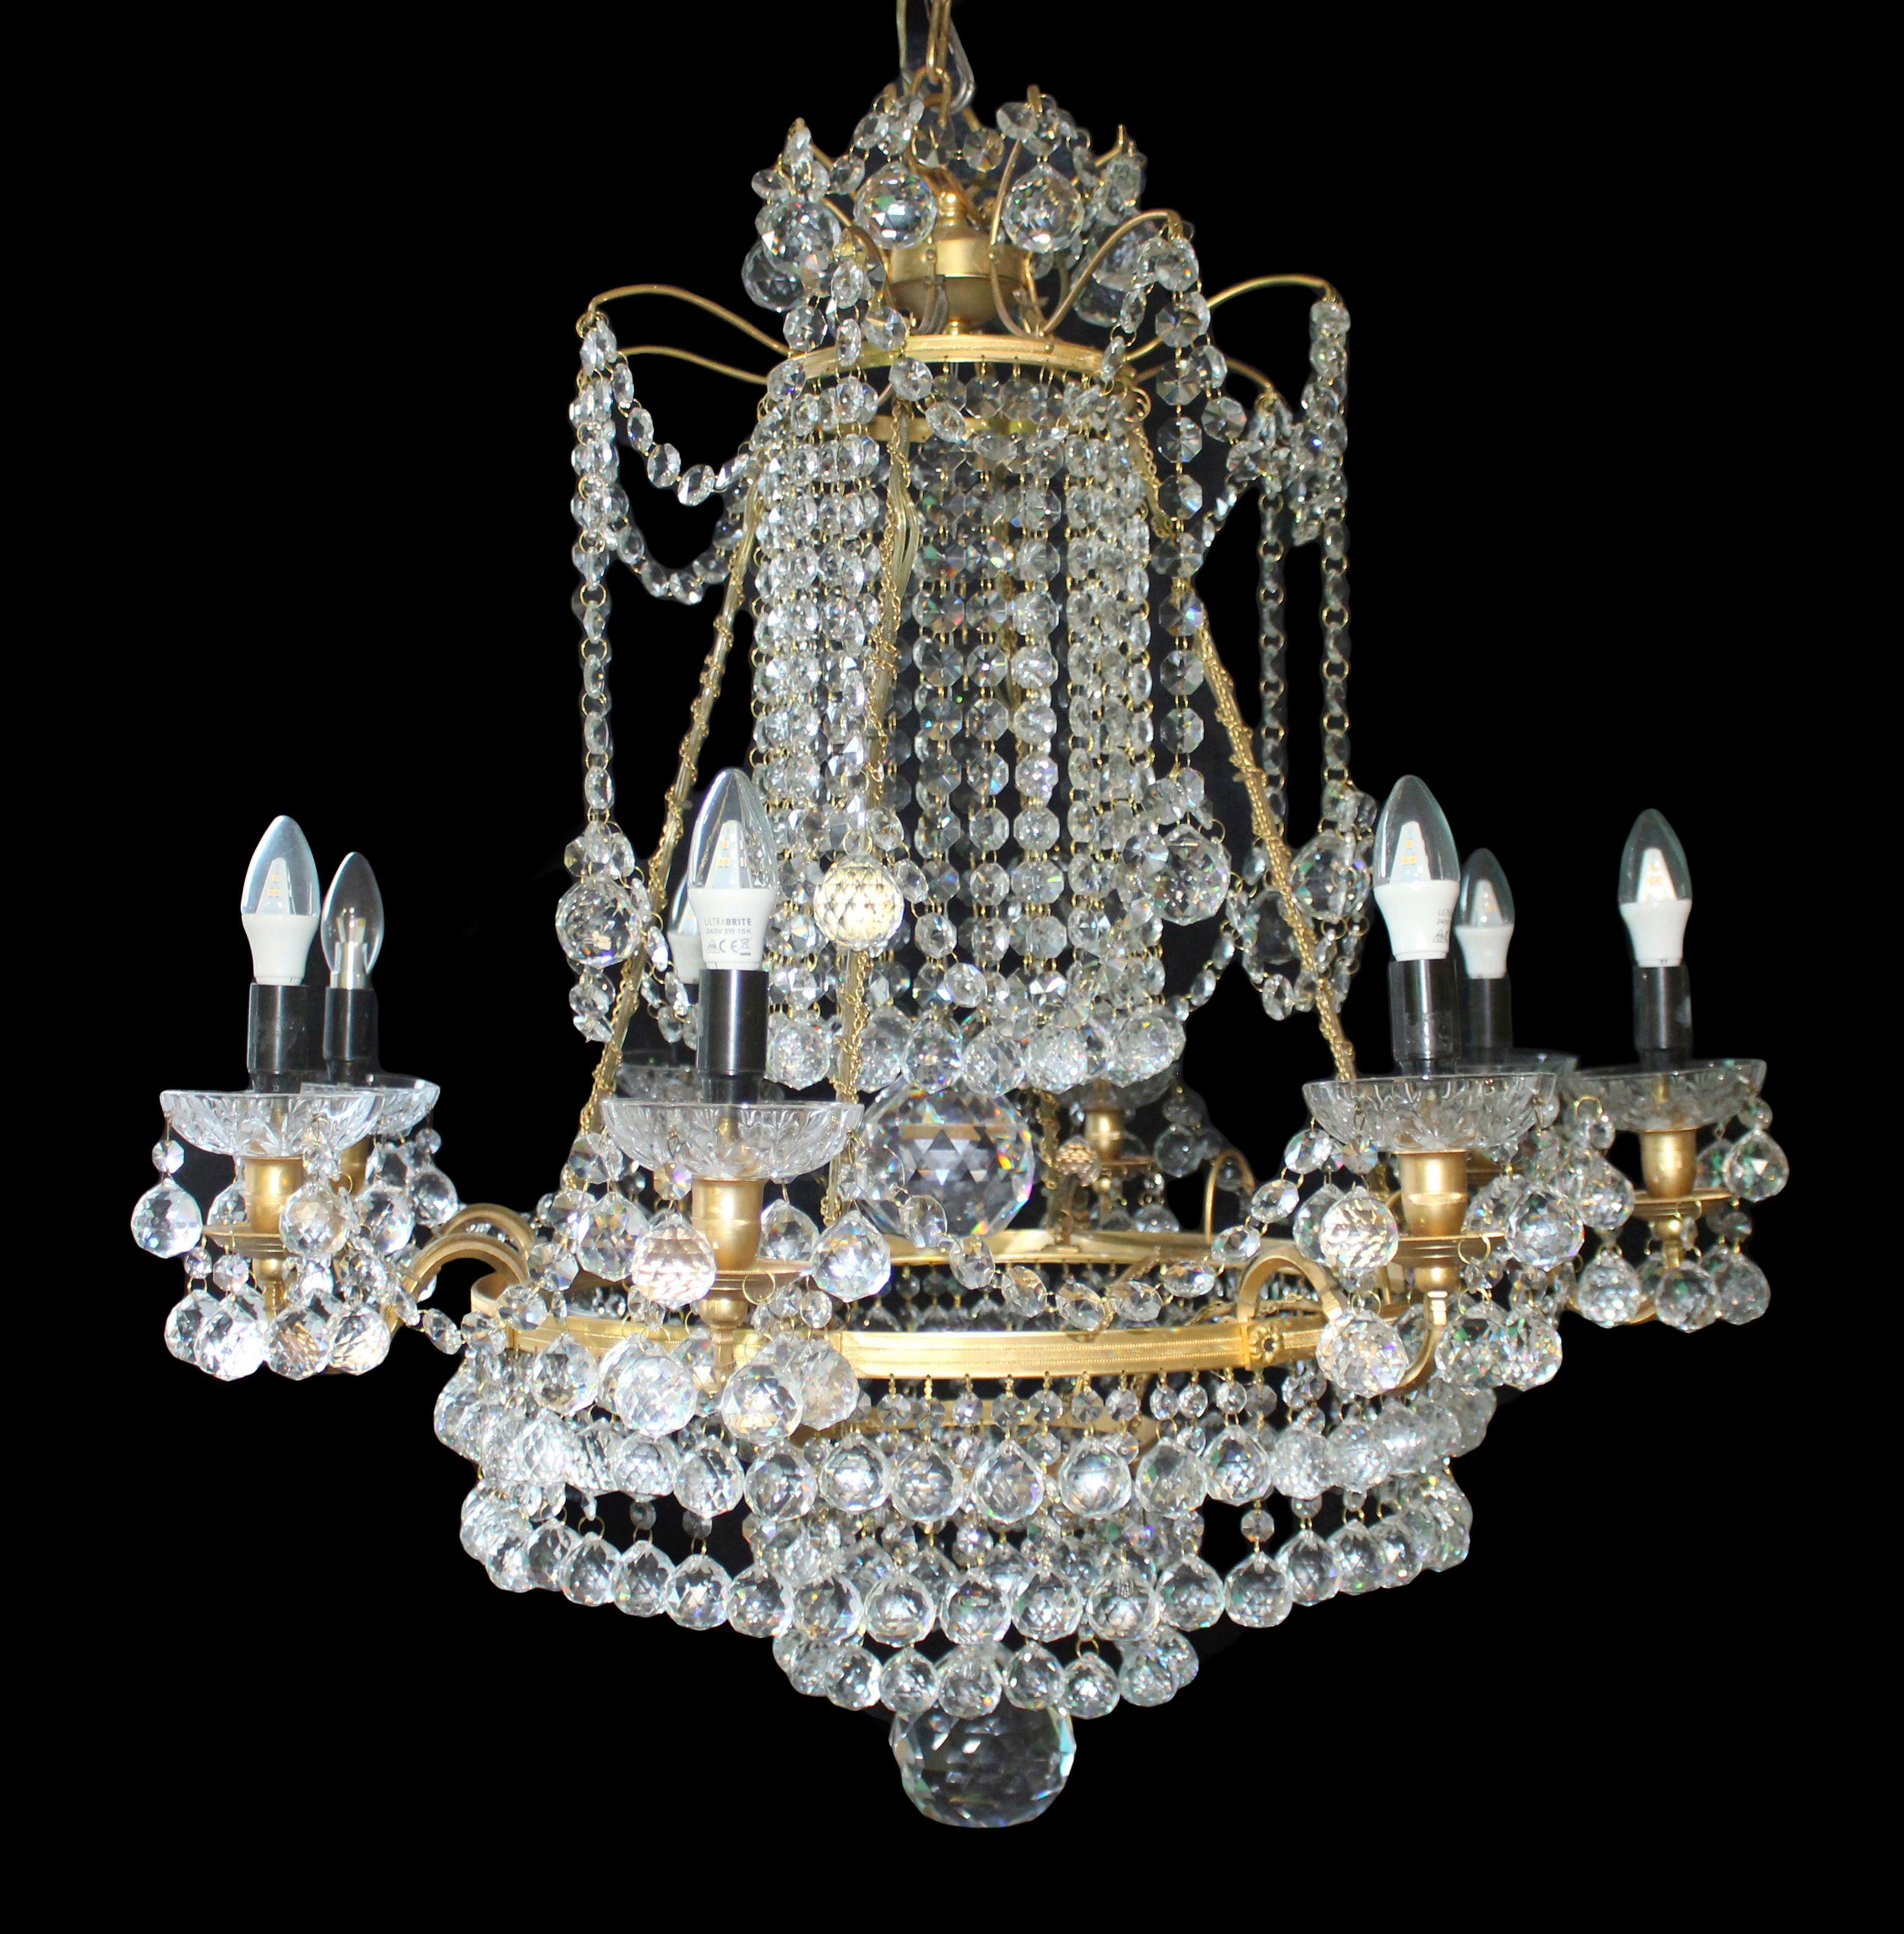 Period late 20th c., purchased in New York

Composition Heavy gilt metal frame. Profusely dressed in high quality crystal lustres with crystal sconces. Magnificent large crystal balls to the middle and bottom

Measures: Width 85 cm / 33 1/2